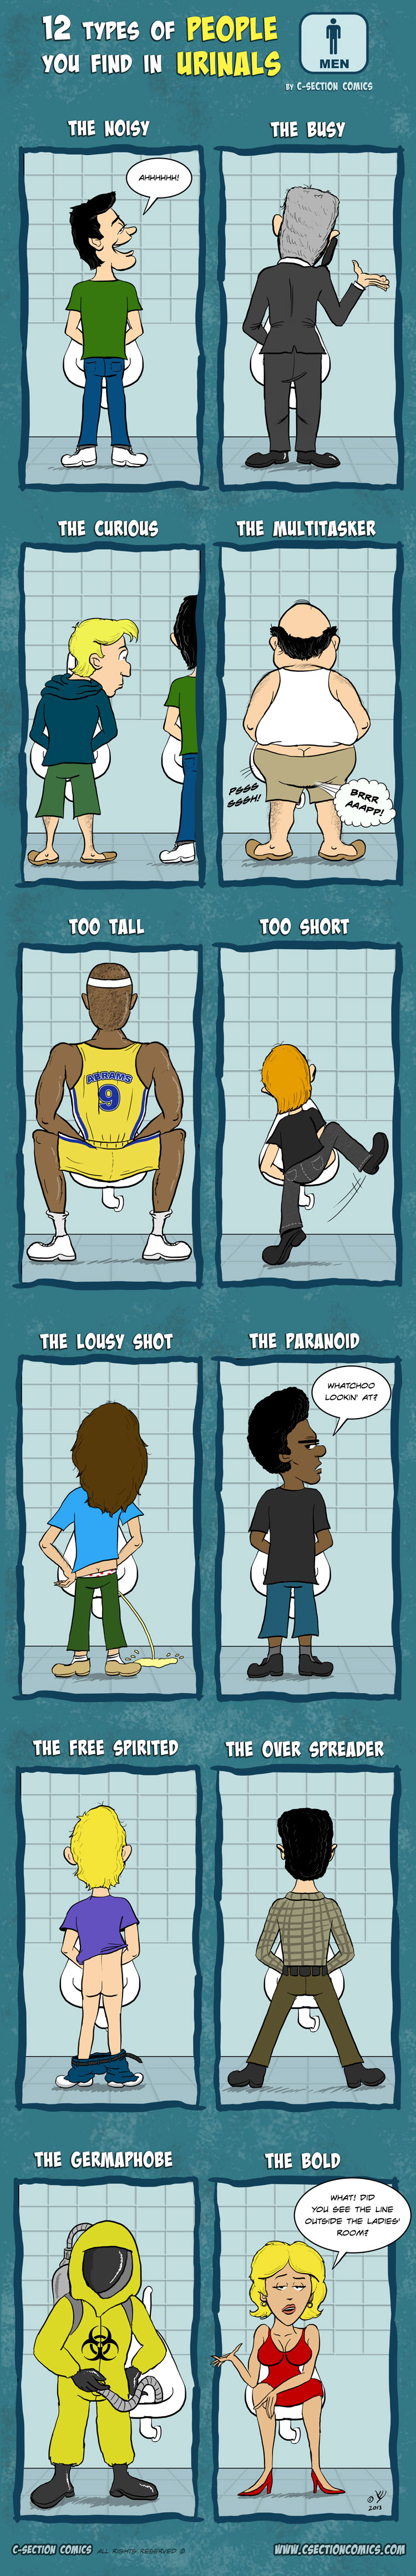 12 Types of People You Find in Urinals - By C-Section Comics